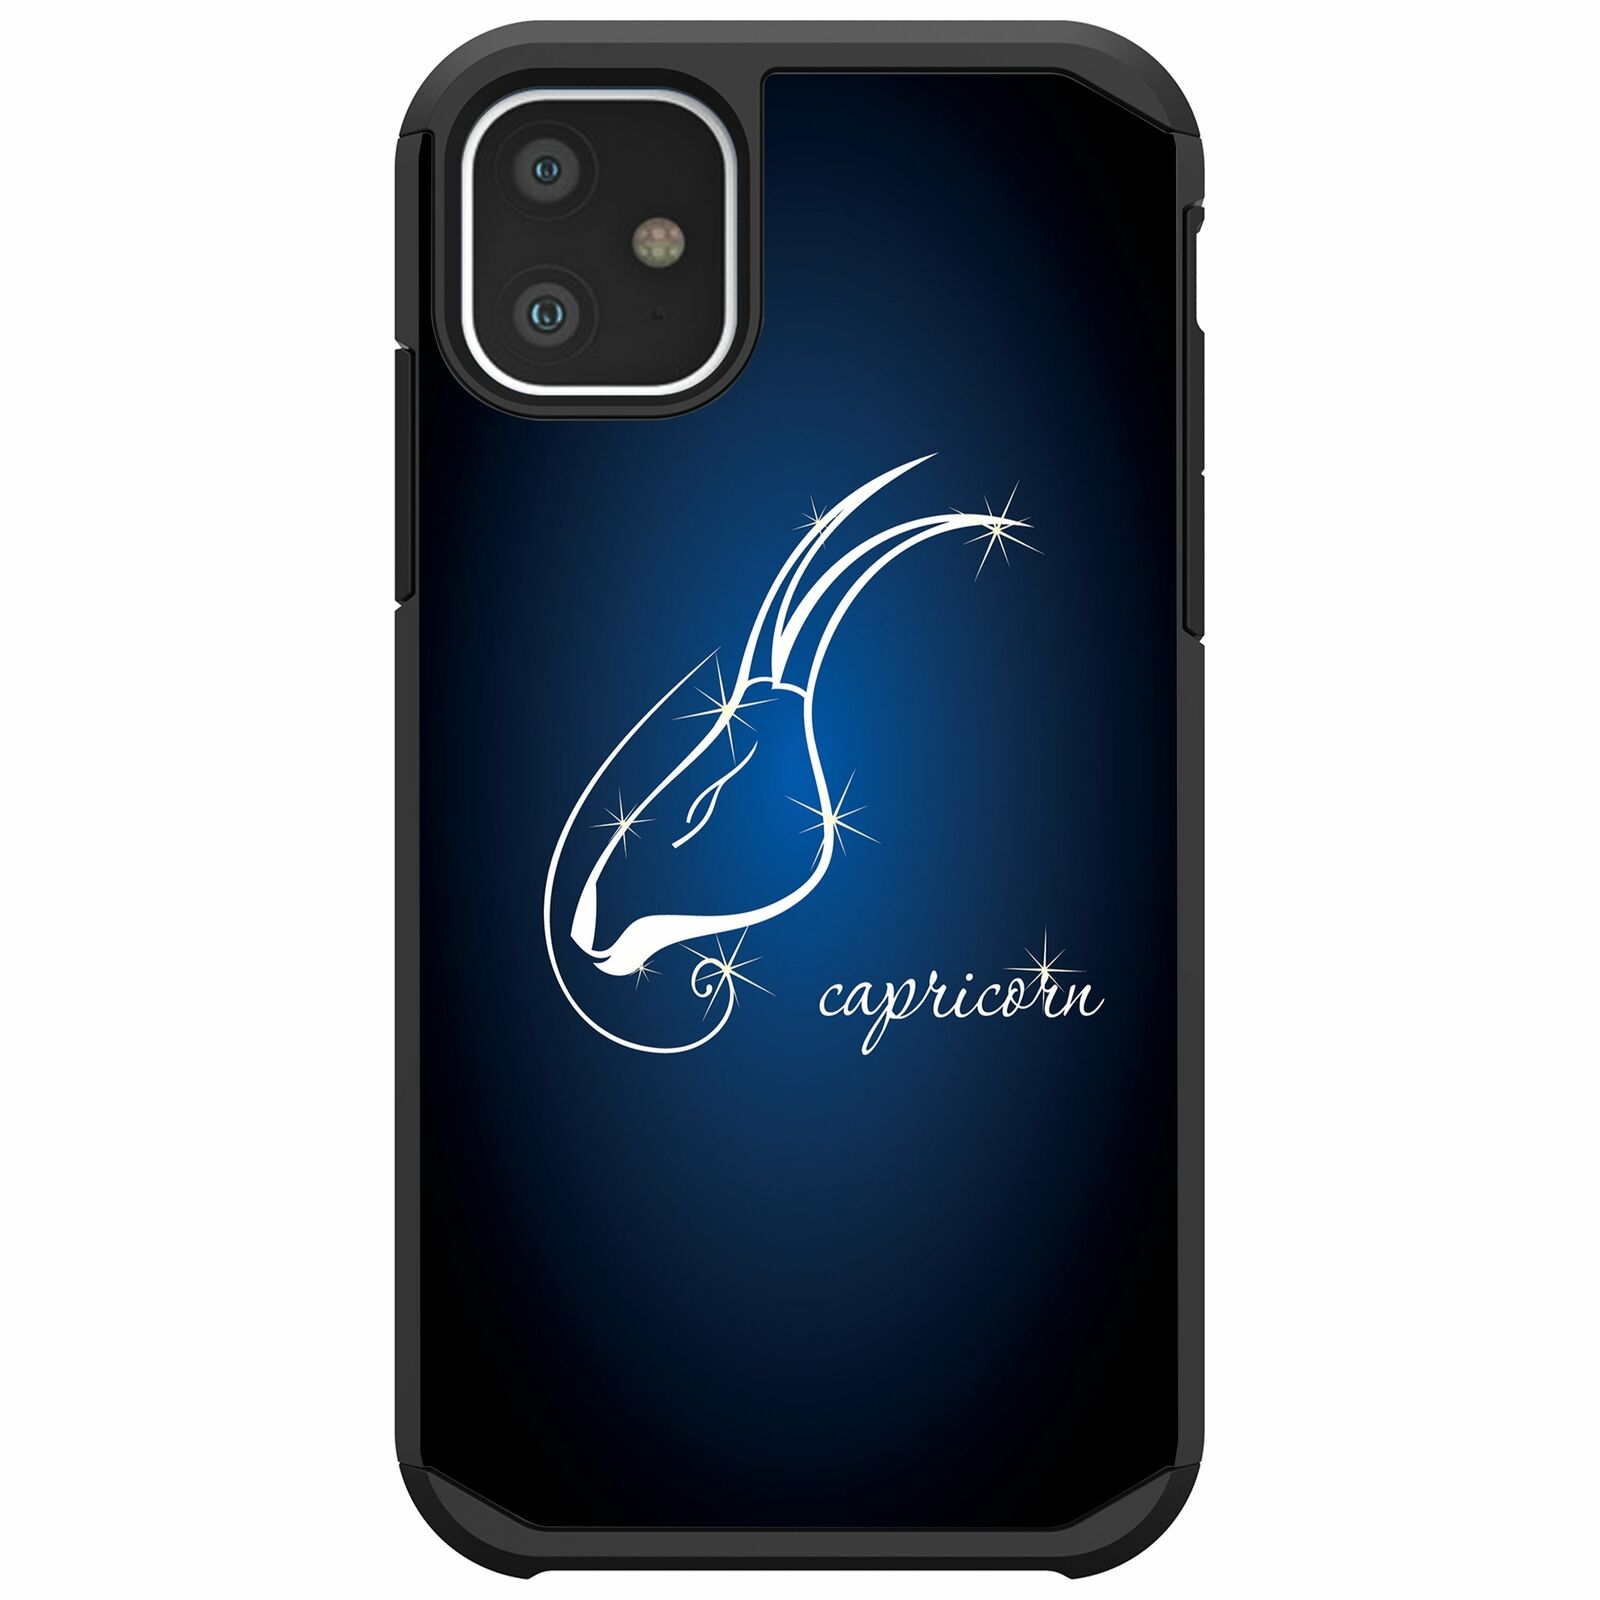 For Apple iPhone 11 (6.1) Slim Protective Dual Layer Case Zodiac iPhone Cases AtlasCase Capricorn 